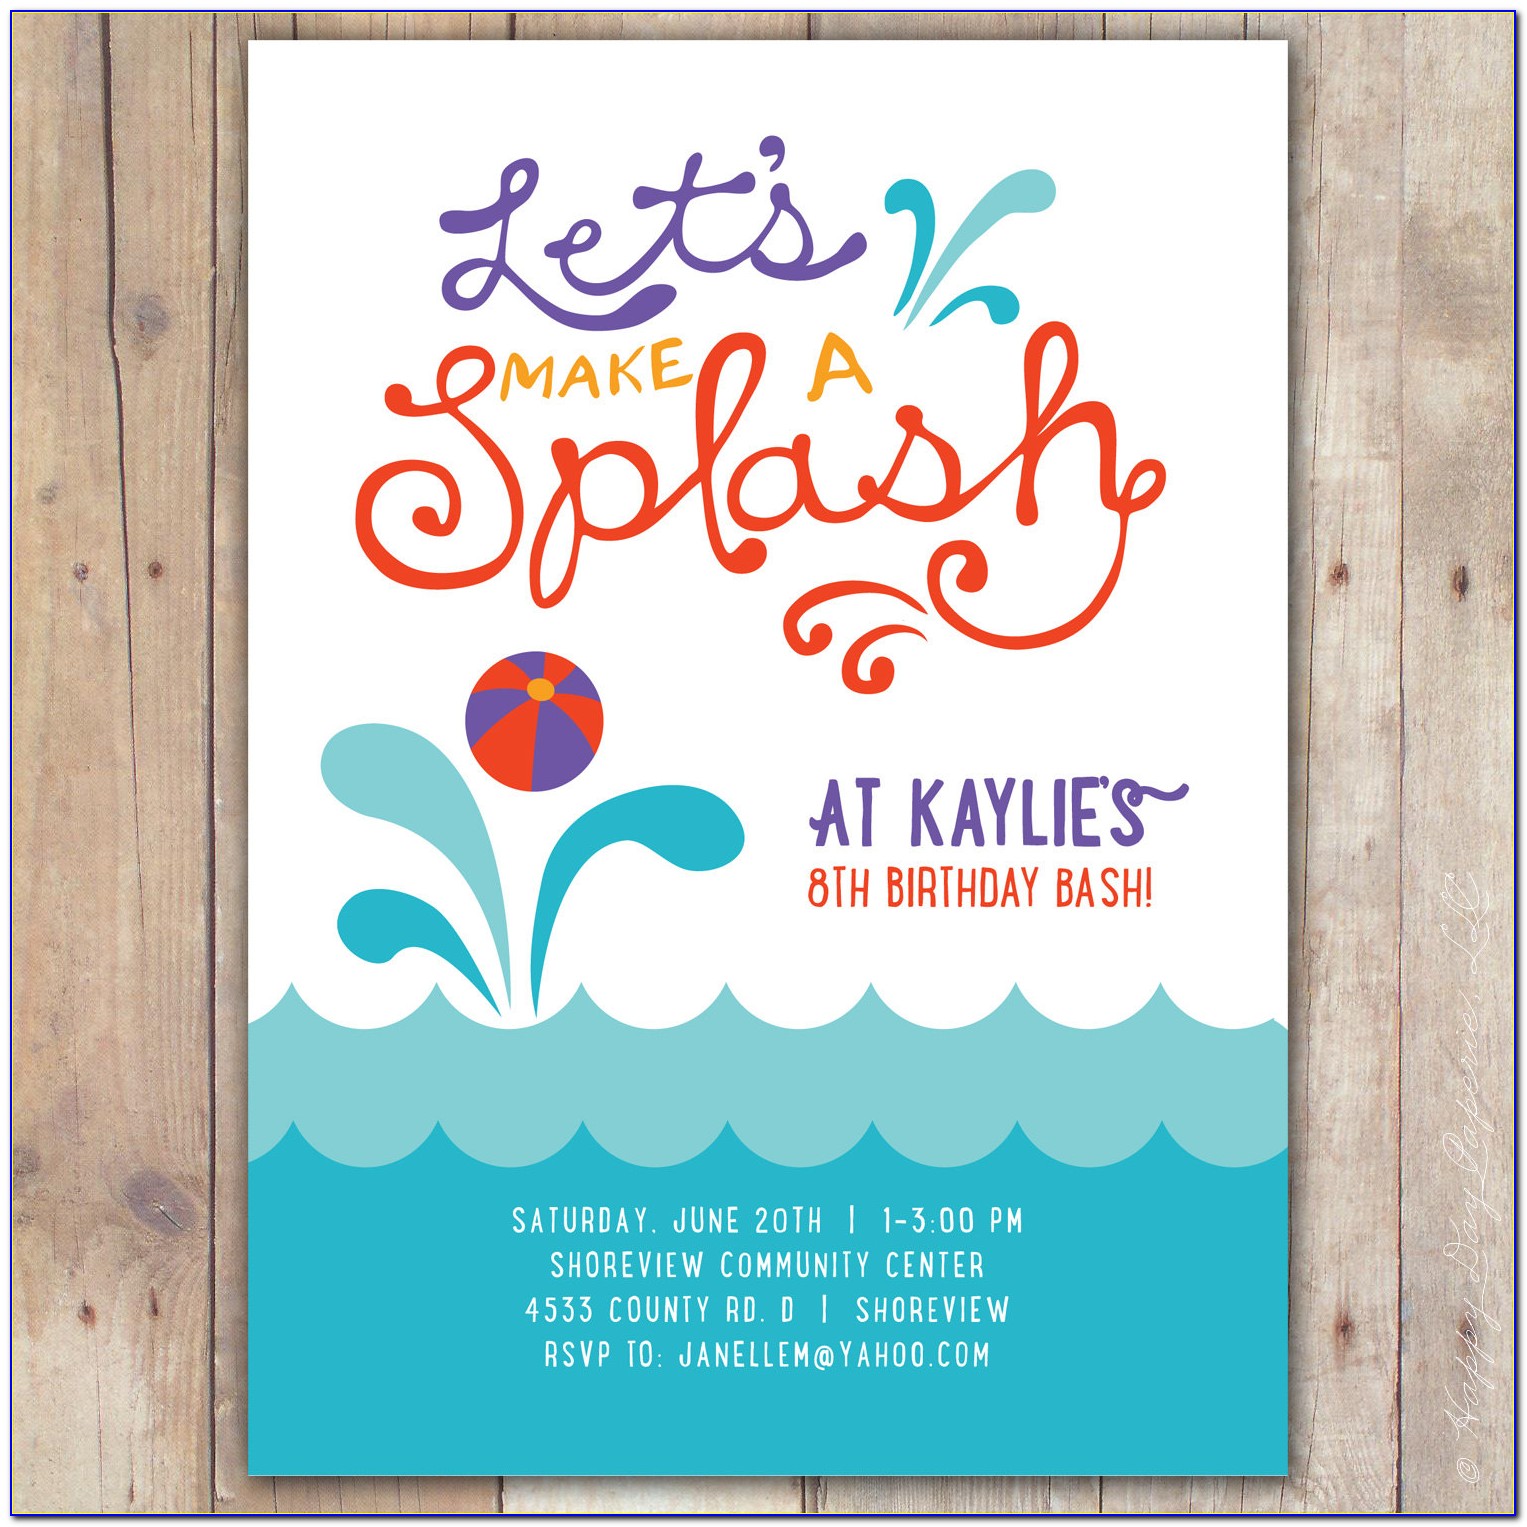 Funny Pool Party Invitation Wording